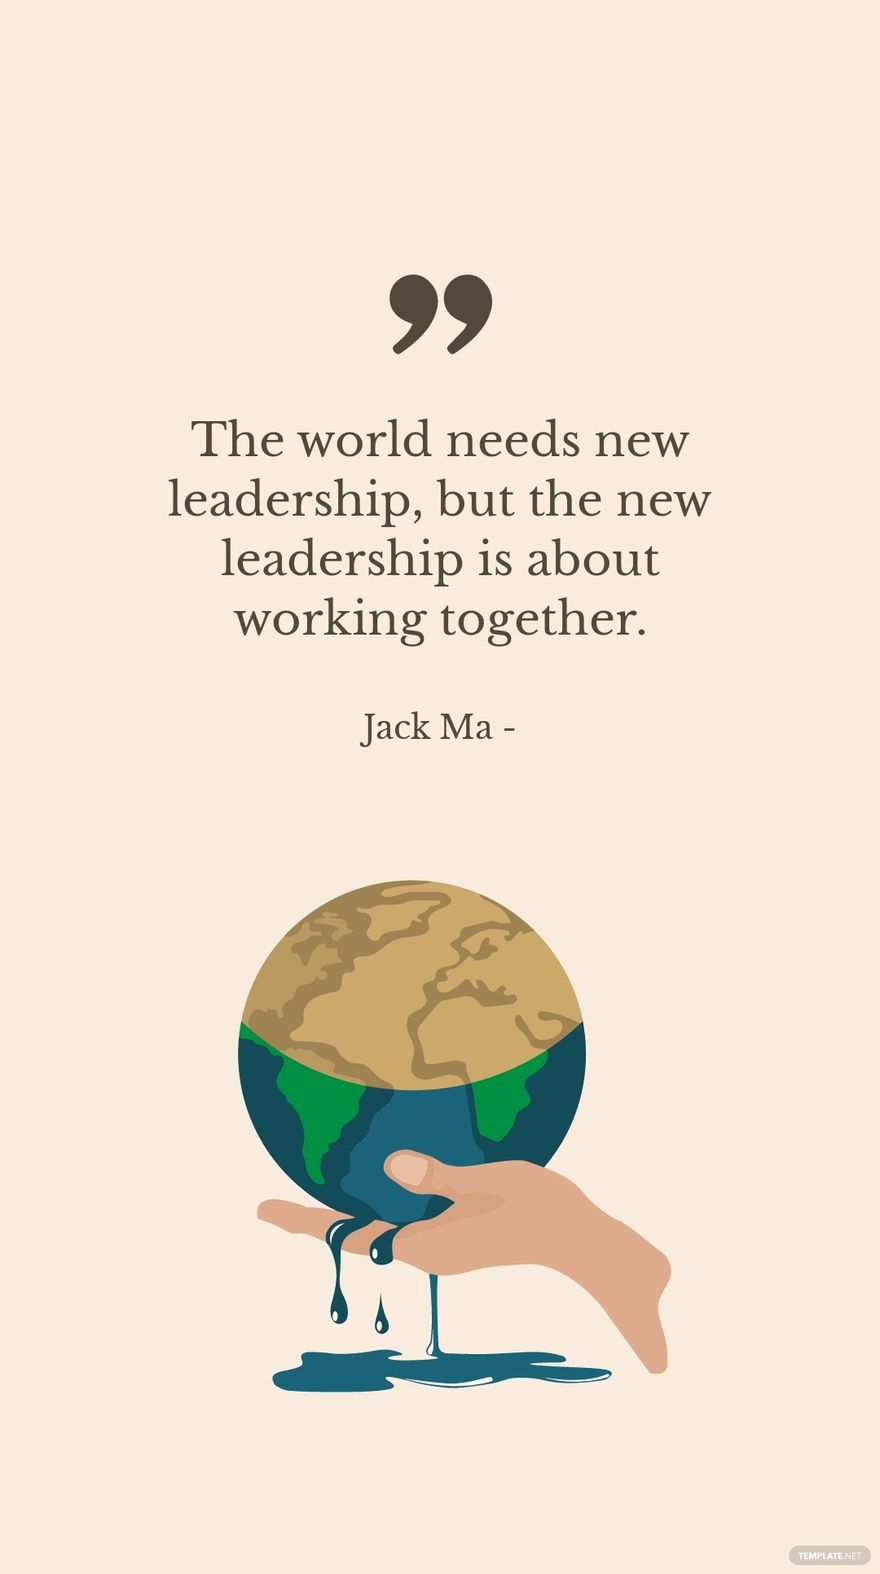 Free Jack Ma - The world needs new leadership, but the new leadership is about working together. in JPG